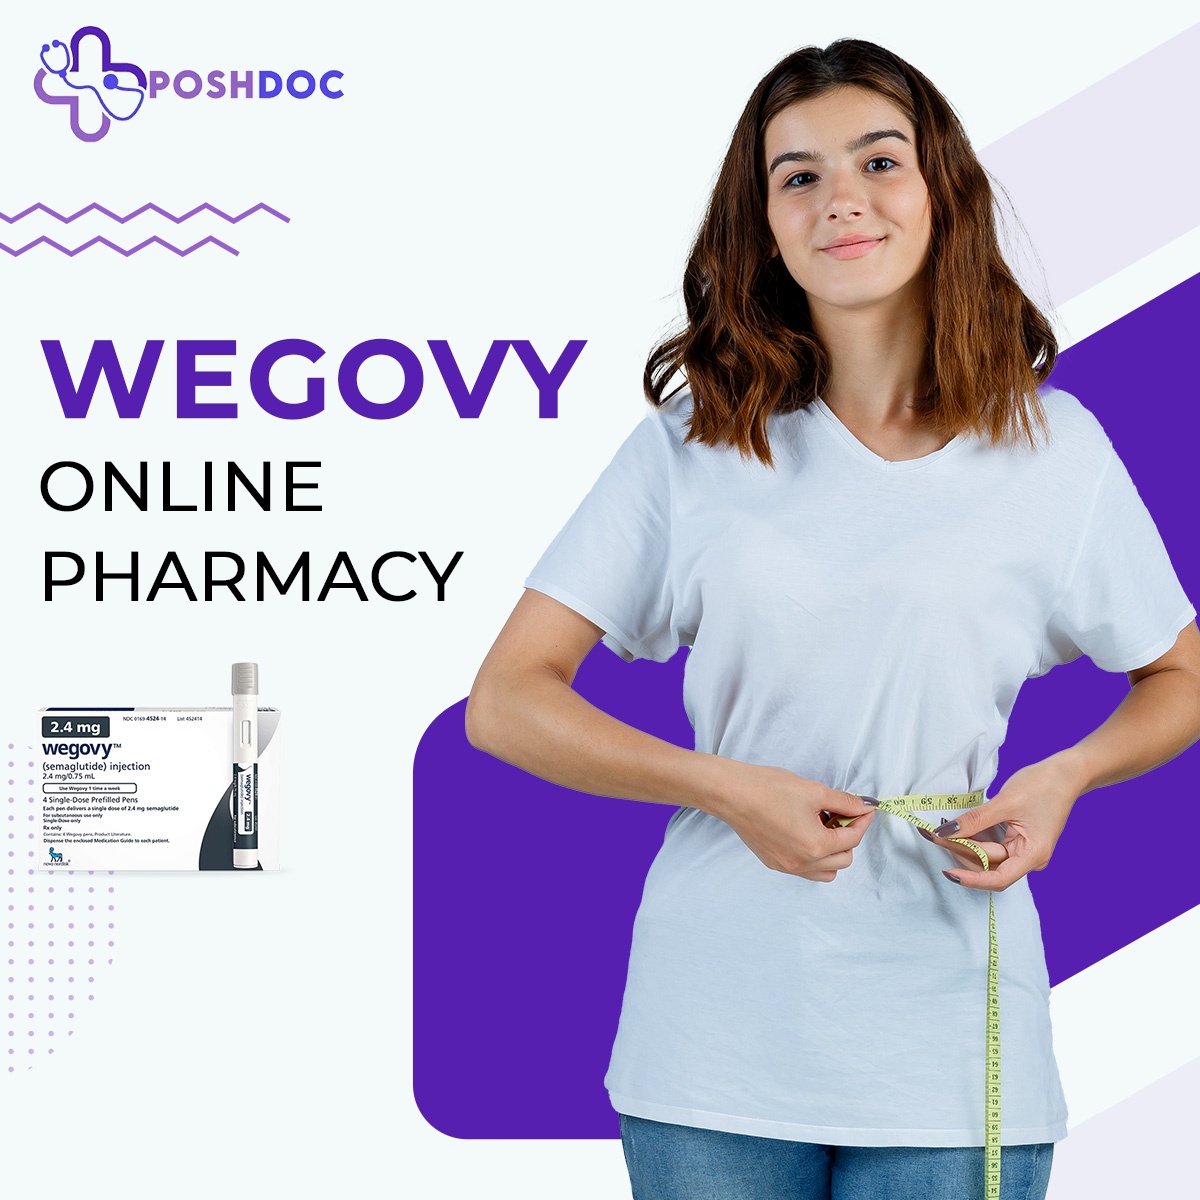 How Wegovy Prescription Online Is Increasing Access to Weight Loss Treatment